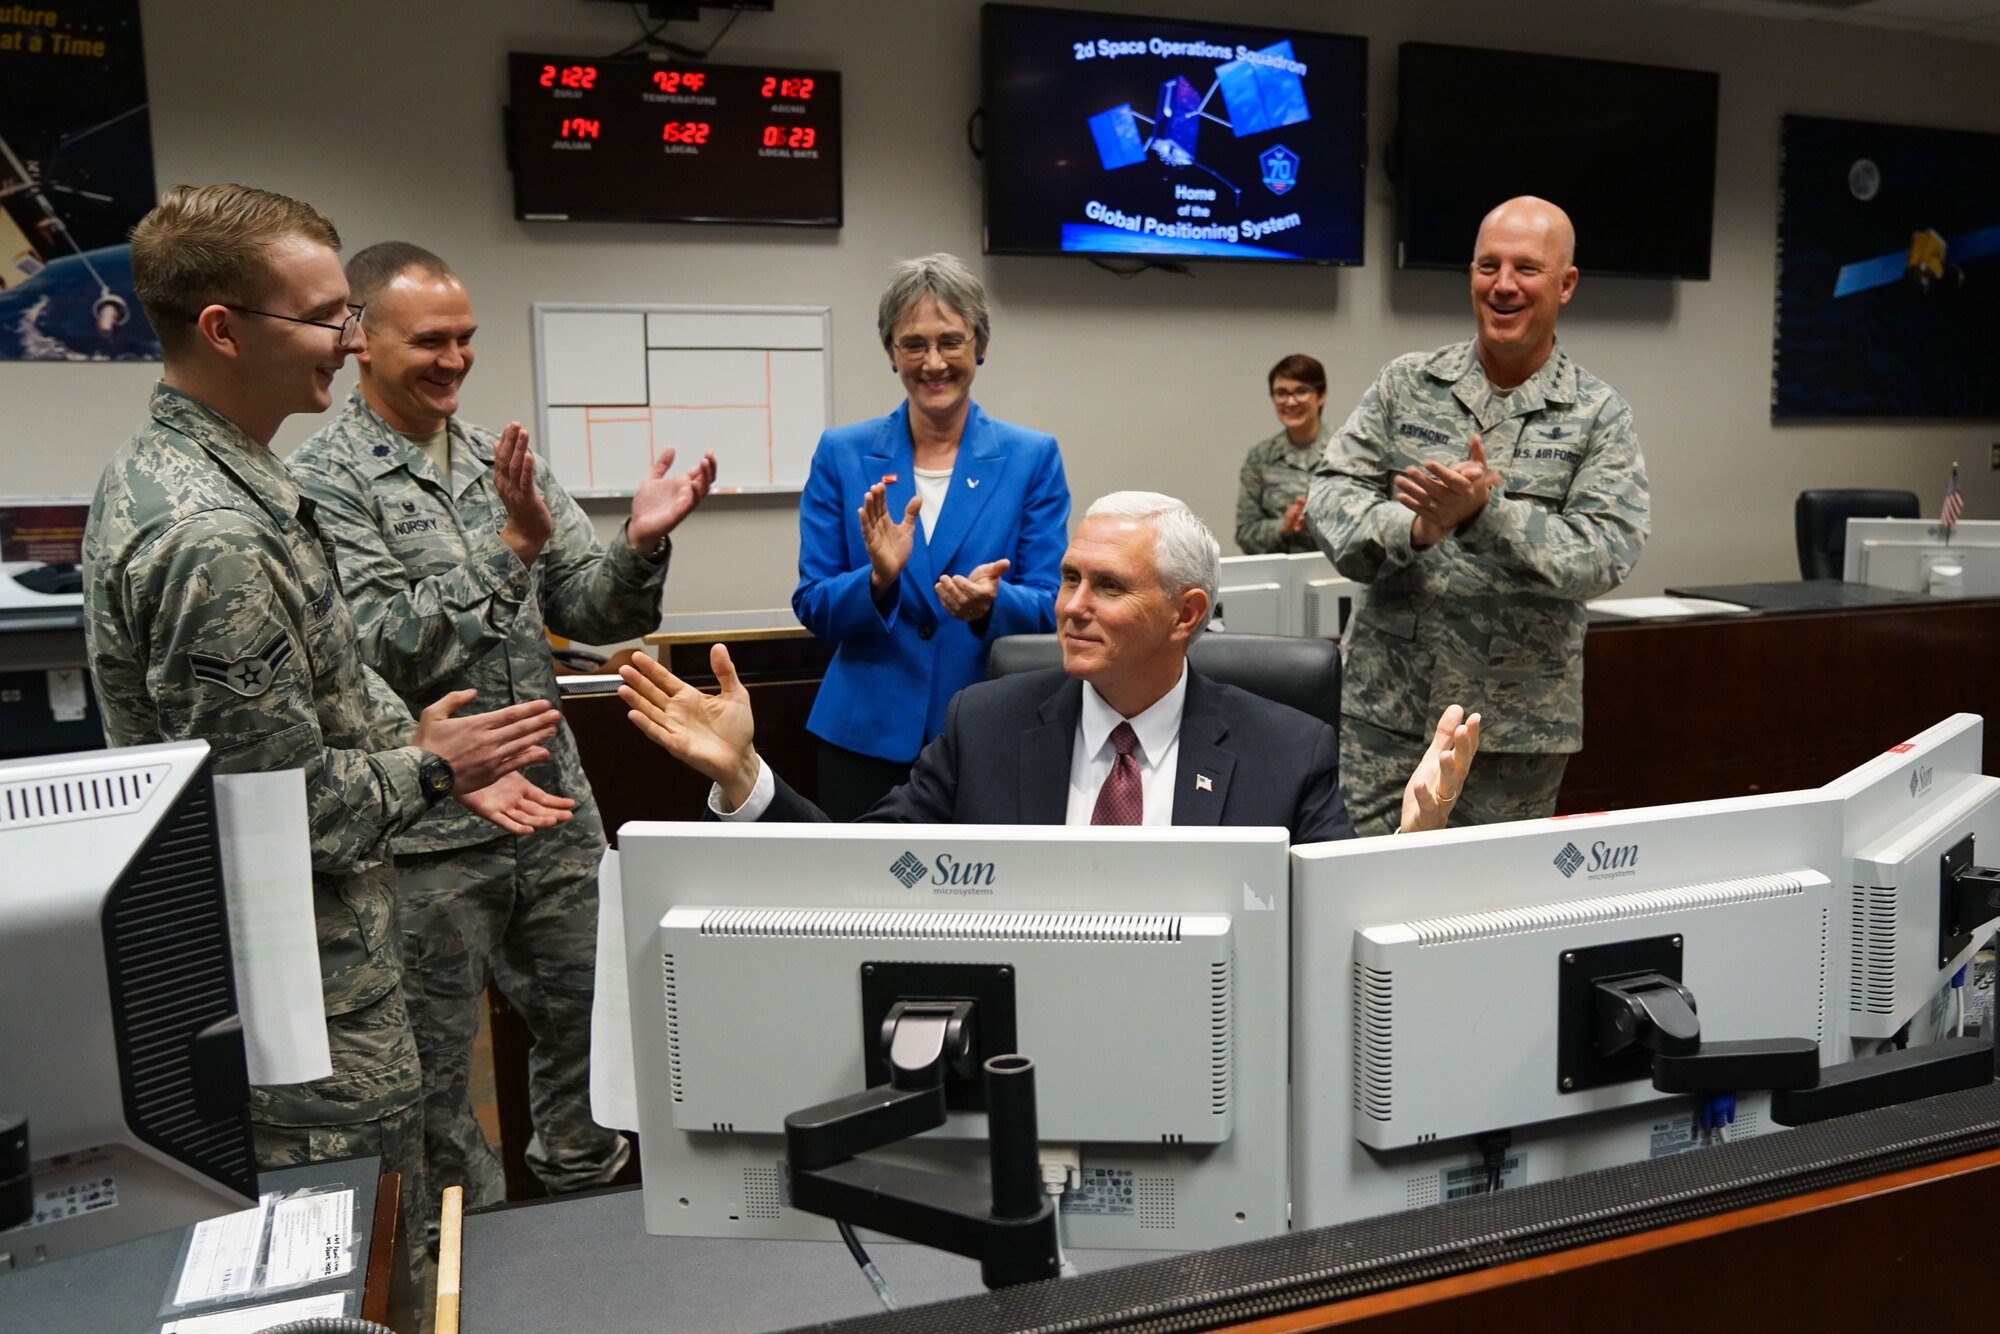 SCHRIEVER AIR FORCE BASE, Colo. -- Vice President Mike Pence visits Peterson AFB, Schriever AFB and Cheyenne Mountain Air Force Station for a closer look at how space plays an integral role in military operations., June 23, 2017. (U.S. Air Force photo/Christopher DeWitt)